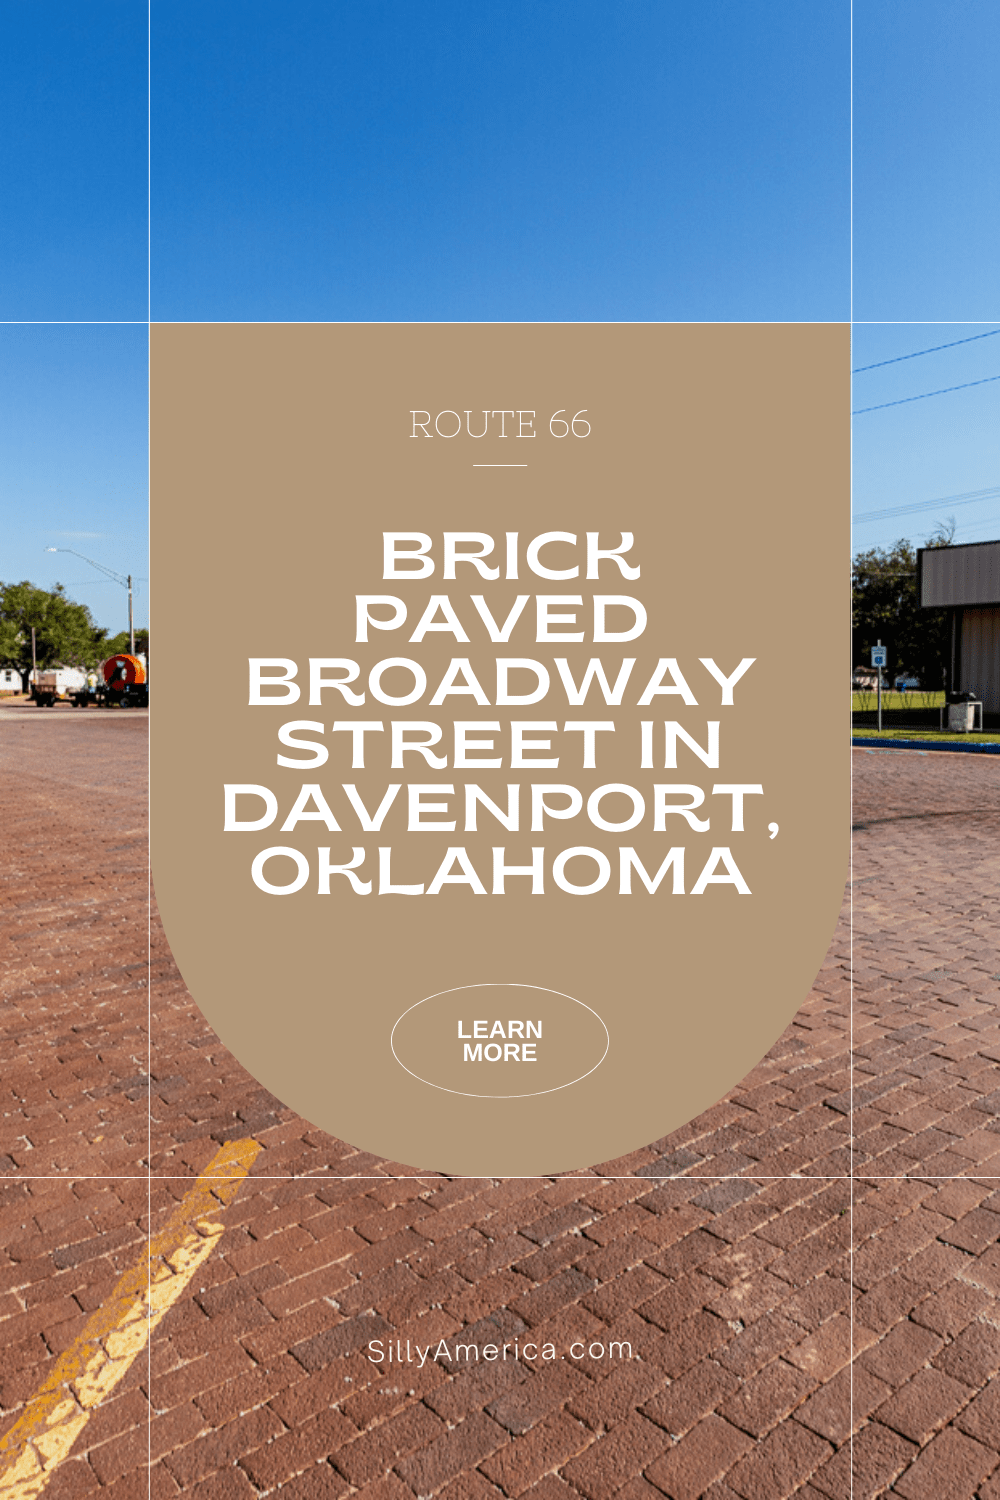 Several blocks of Broadway Street in downtown Davenport, Oklahoma  are still paved with original 1925/1926 bricks from Davenport Brick & Tile Company. This historic red Brick Paved Broadway Street was listed in the National Register of Historic Places in 2004 and featured a giant mural.  #RoadTrips #RoadTripStop #Route66 #Route66RoadTrip #OklahomaRoute66 #Oklahoma #OklahomaRoadTrip #OklahomaRoadsideAttractions #RoadsideAttractions #RoadsideAttraction #RoadsideAmerica #RoadTrip